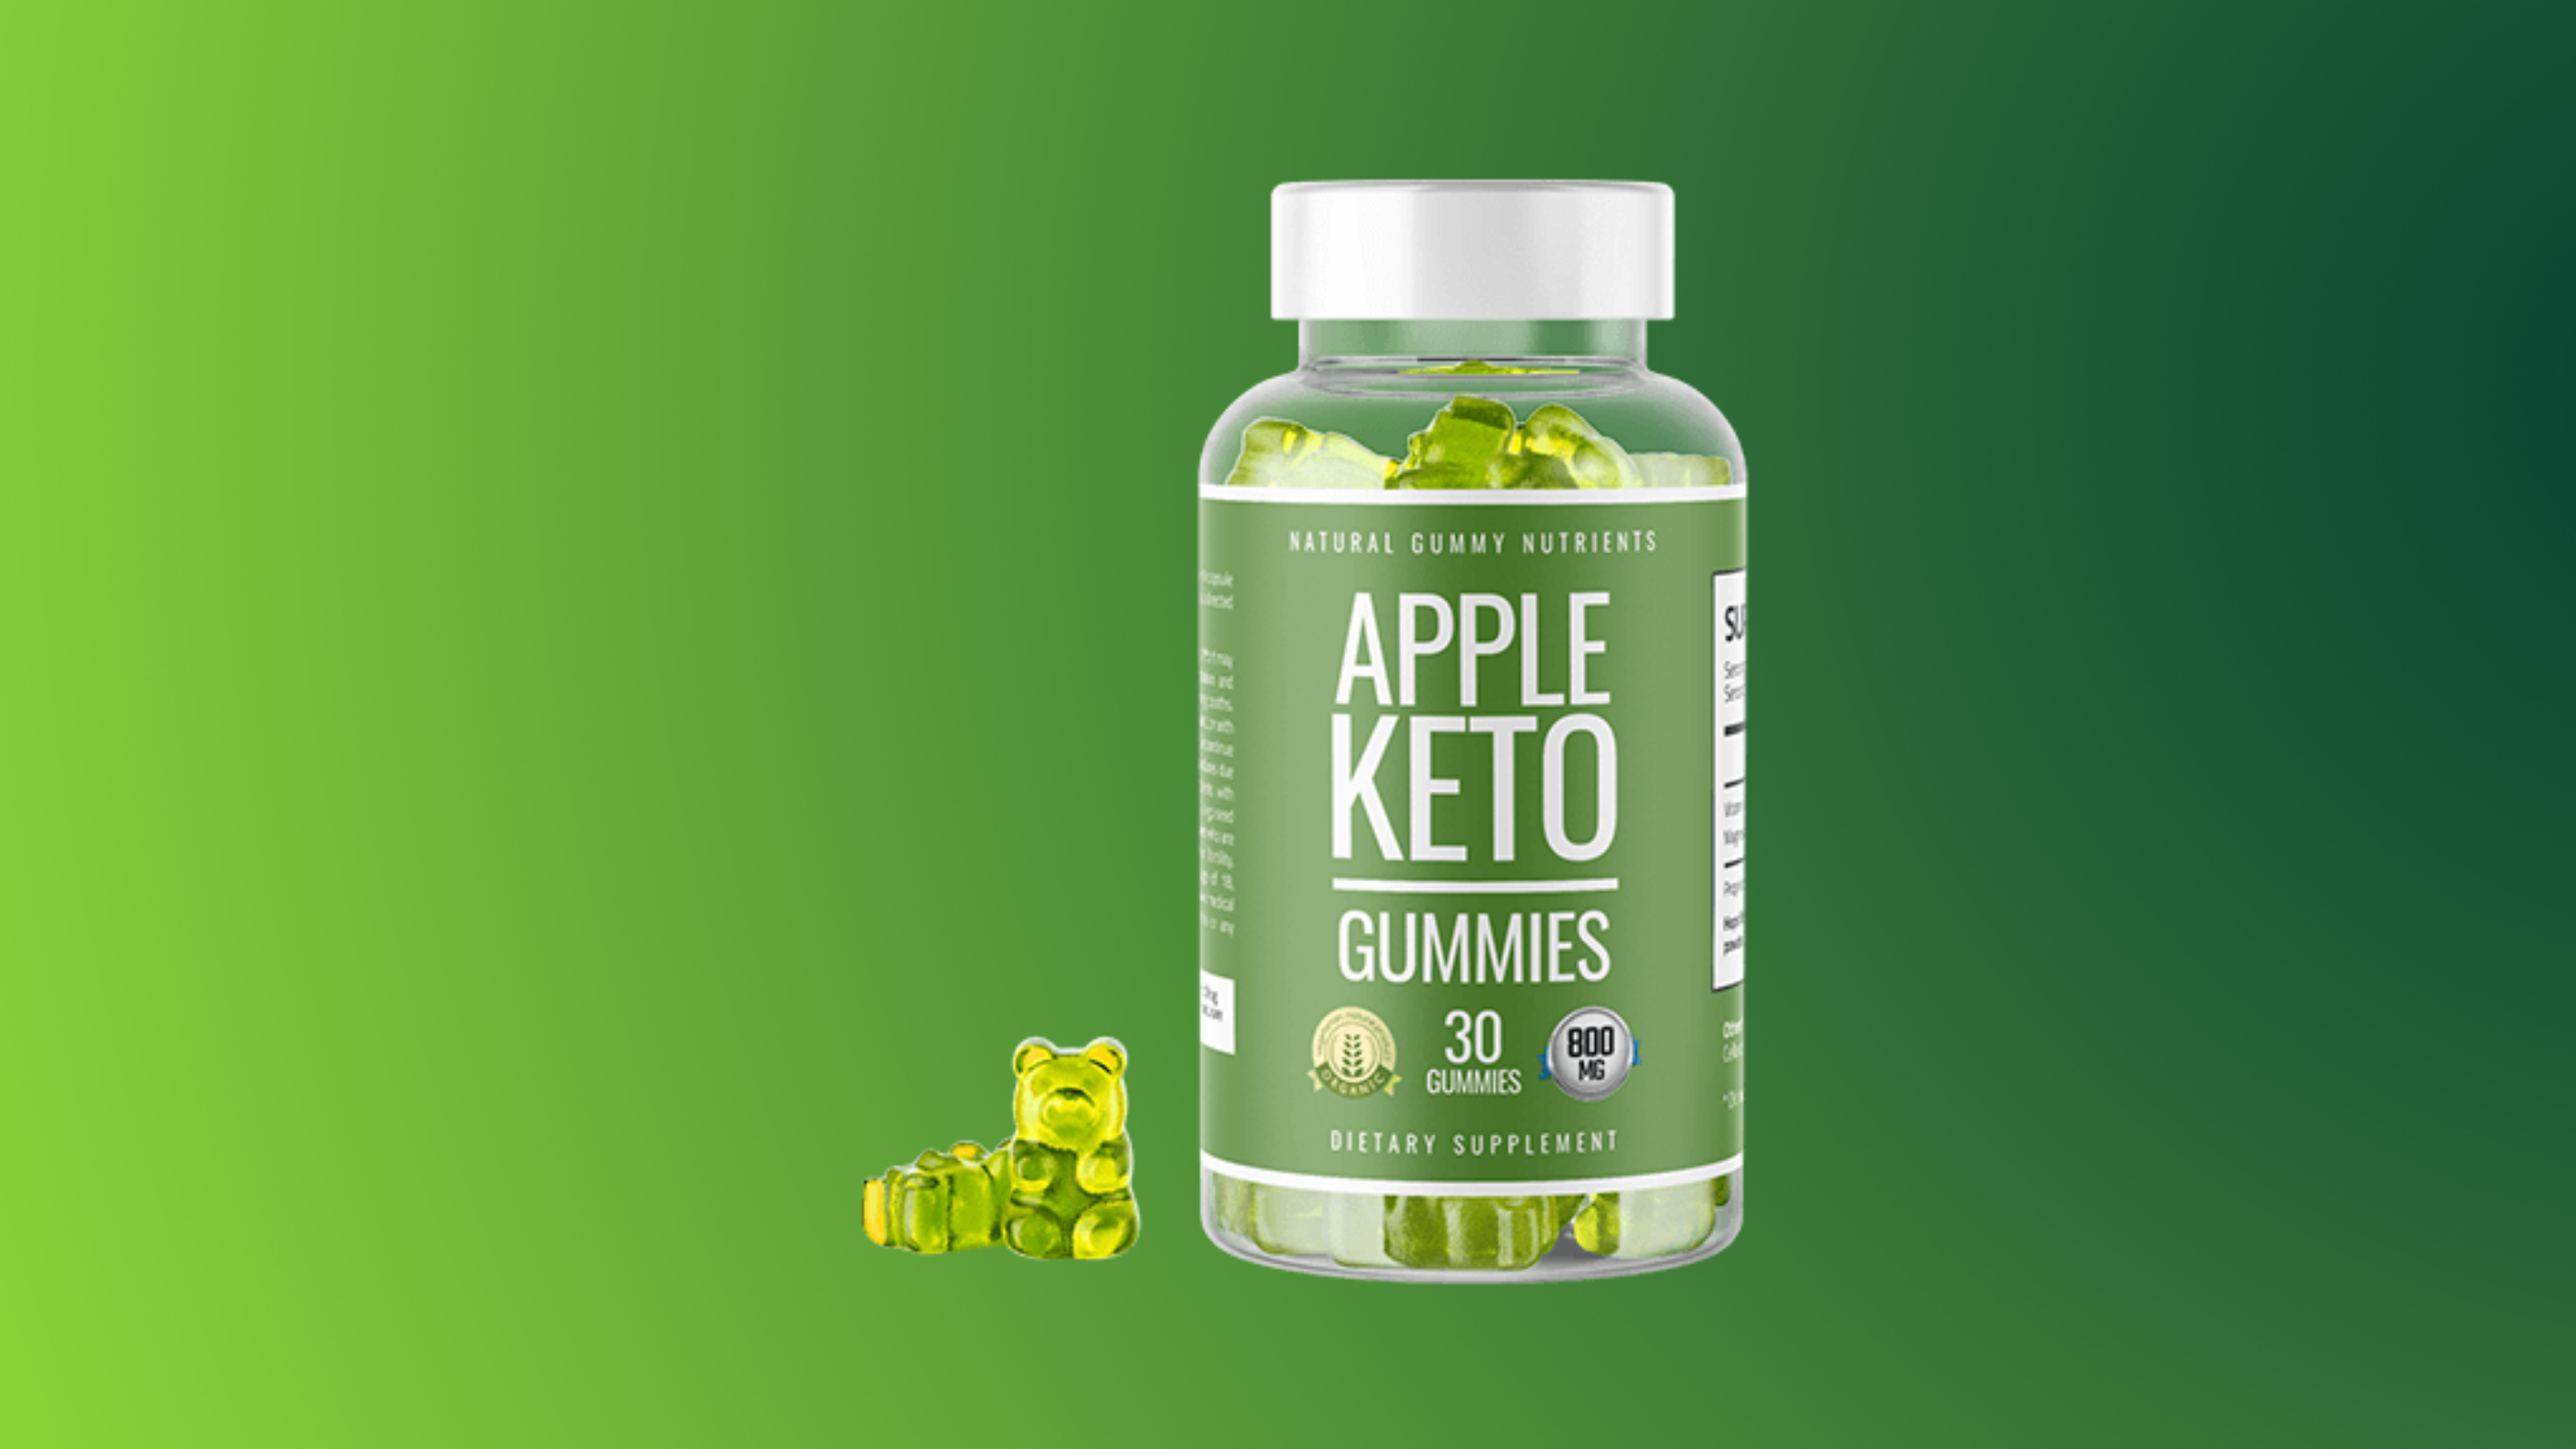 APPLE KETO GUMMIES WOOLWORTHS AUSTRALIA REVIEWS 100% CLINICALLY APPROVED PILLS FOR WEIGHT LOSS!